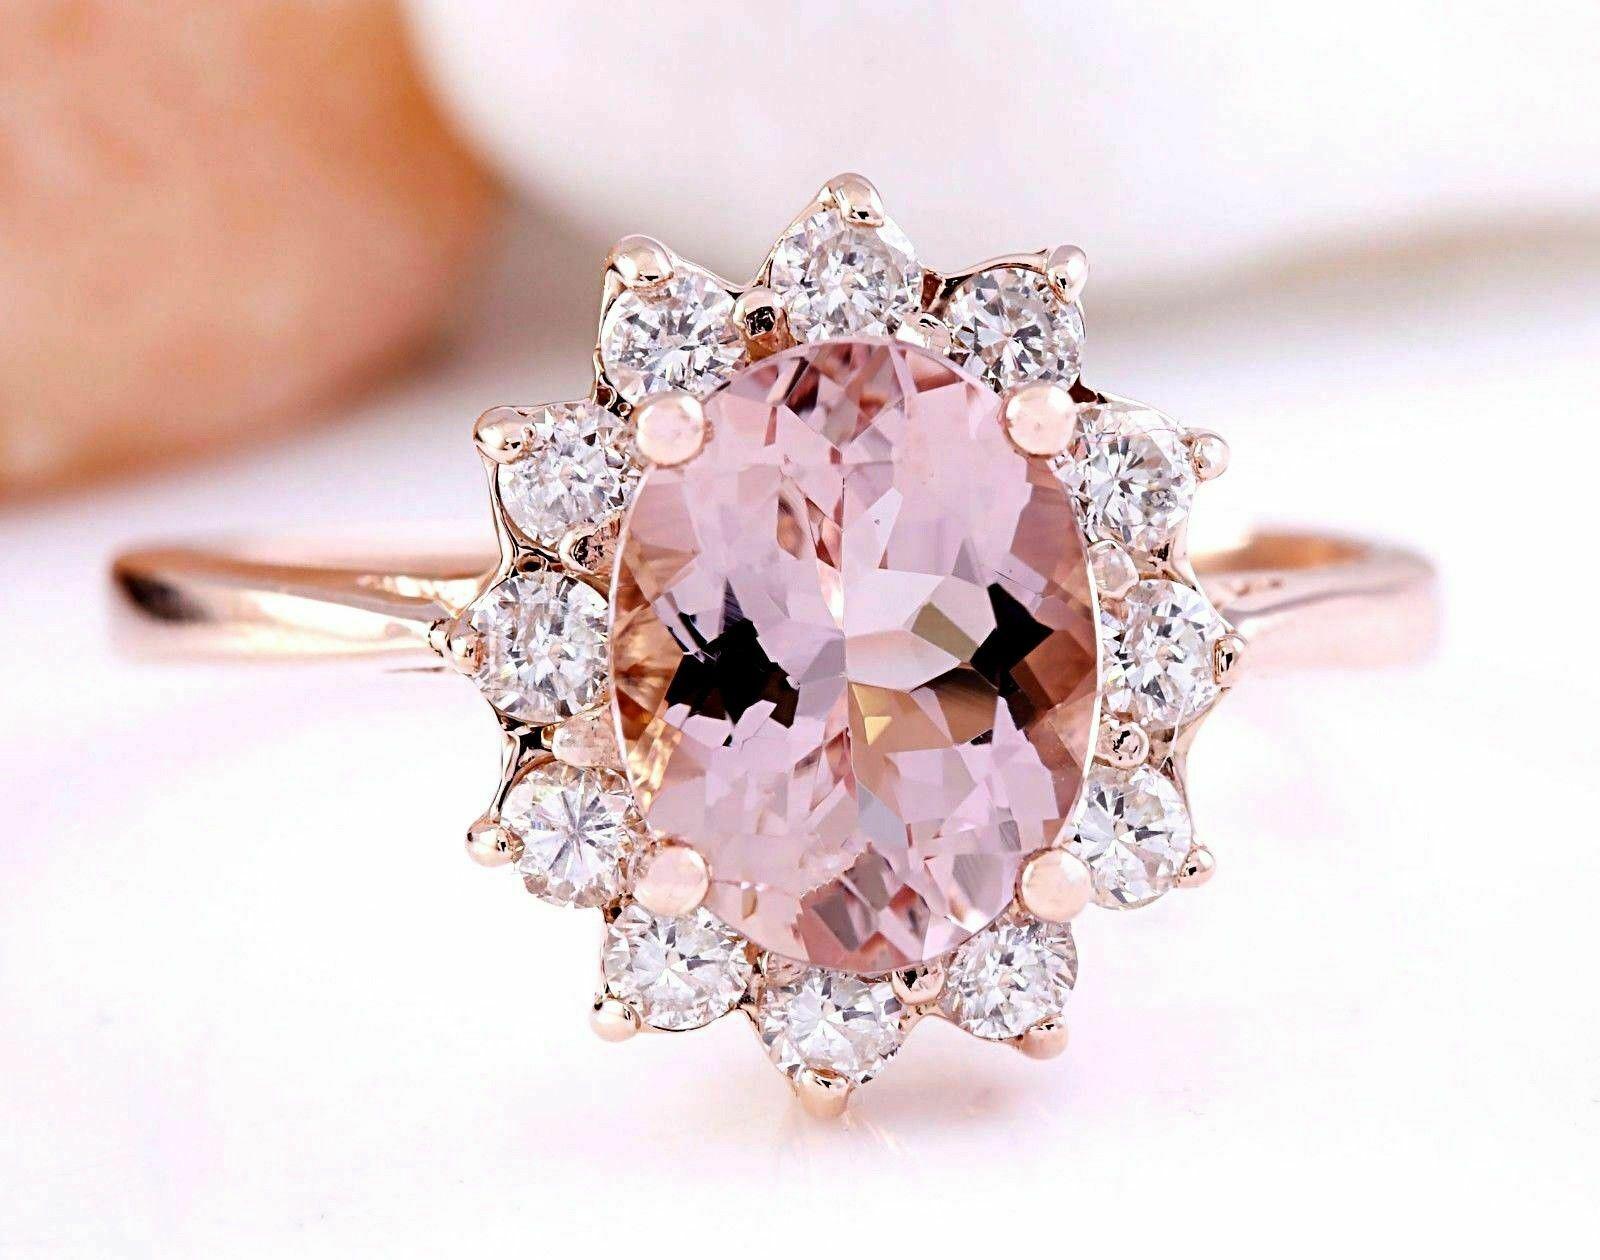 
2.05 Carat Morganite  Ring with Diamonds and set 14 Karat Rose Gold 


Morganite was named in honor of J.P. Morgan, the American banker and philanthropist, by the New York Academy of Sciences. George F. Kunz, the famous gemmologist who headed the